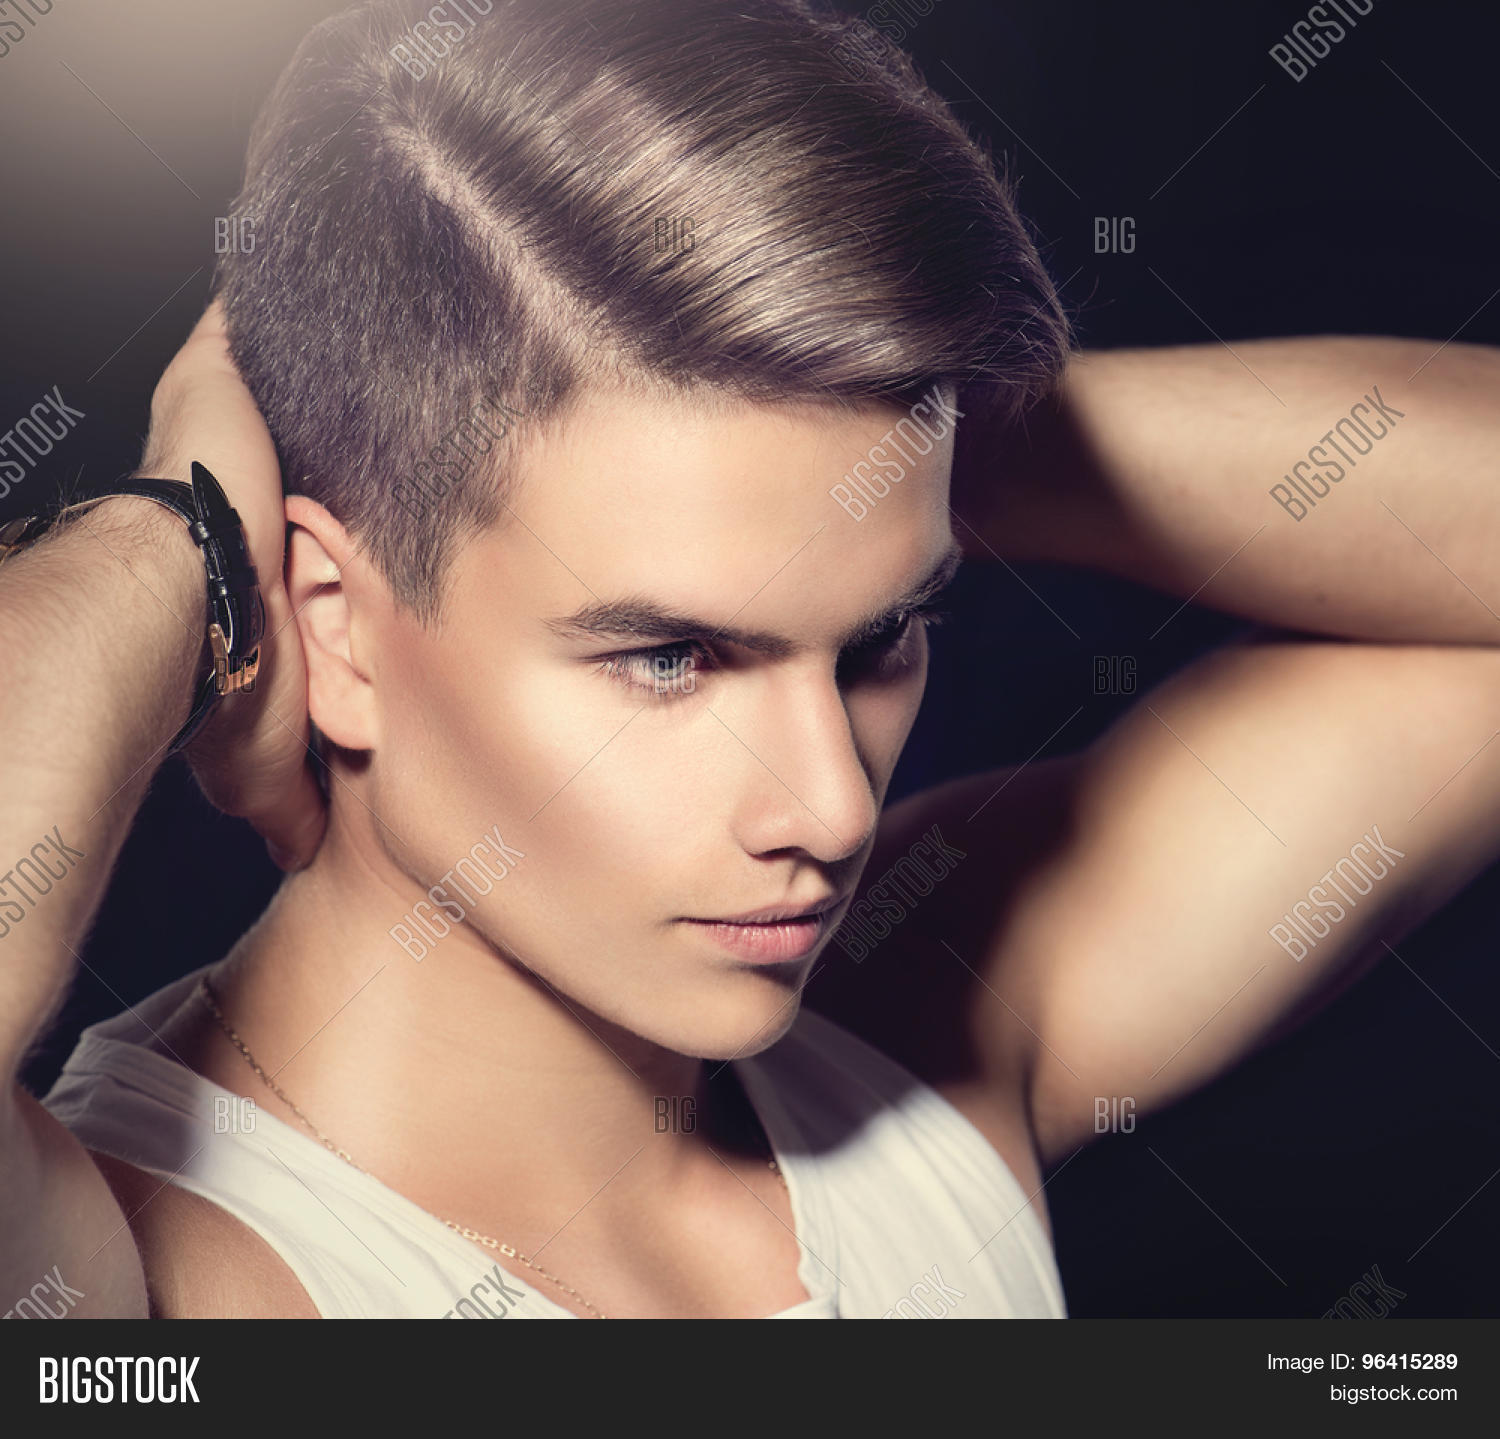 Handsome Young Man. Image & Photo (Free Trial) | Bigstock